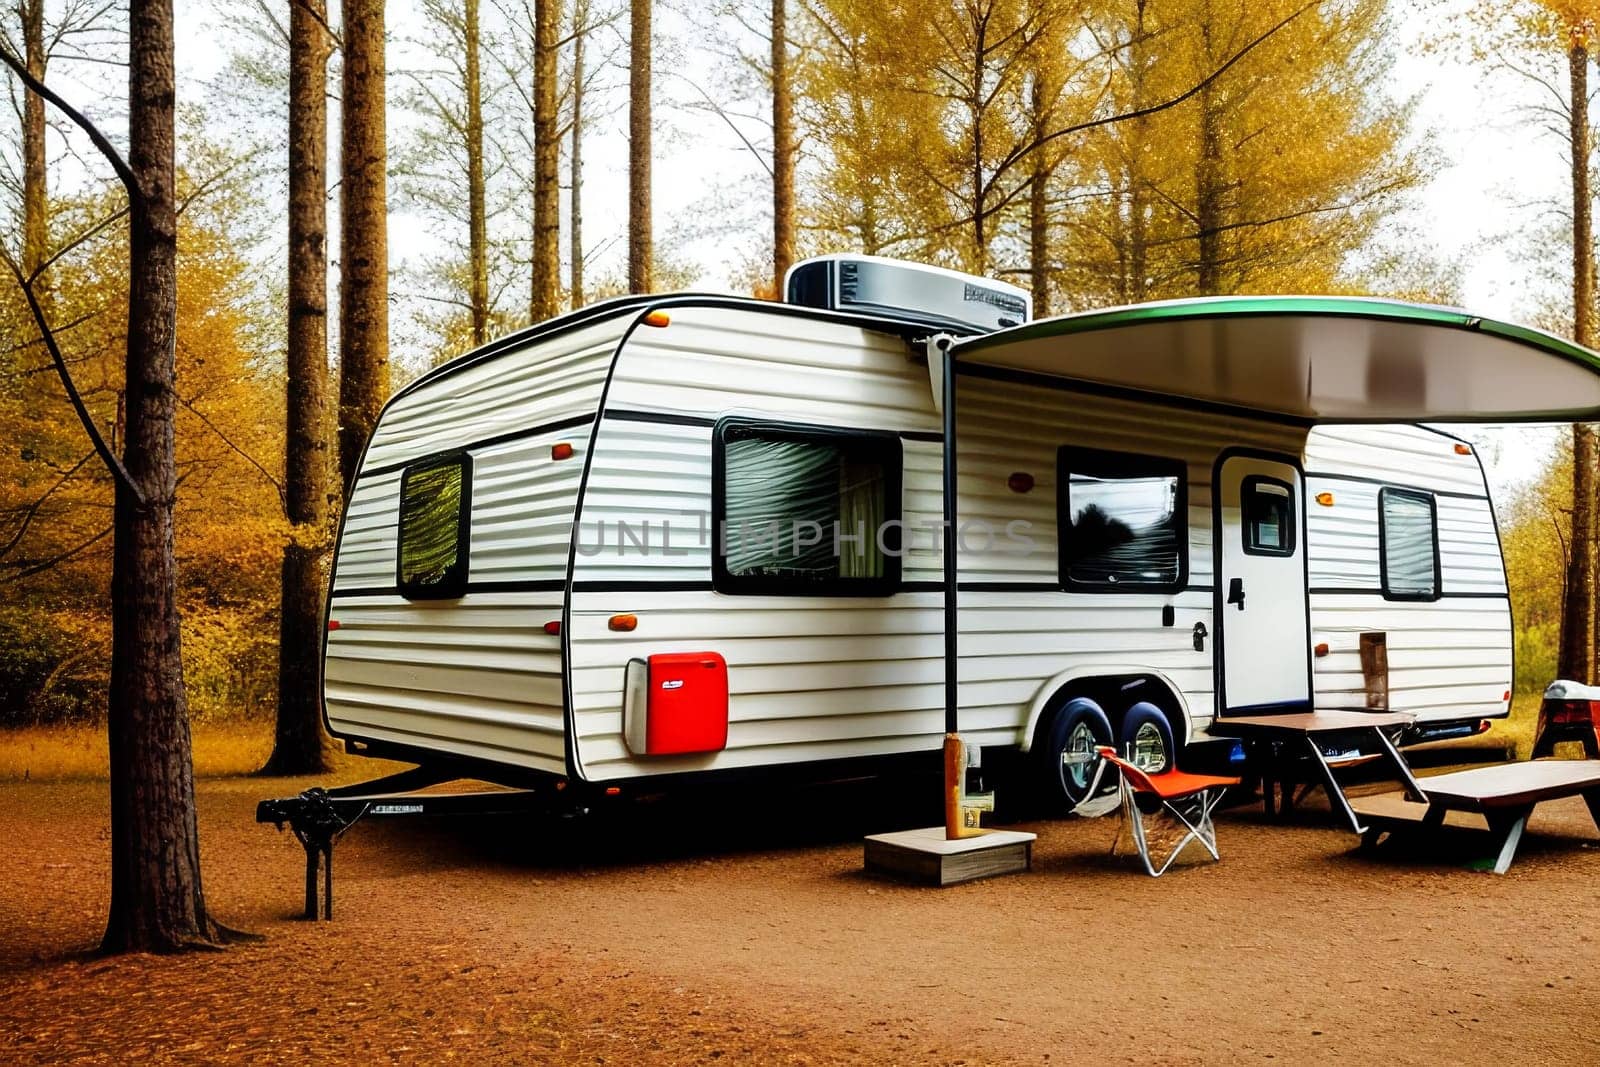 The trailer of the mobile home is camping in the fall, the concept of a family trip around the native country in a camper van or camper van and camping life